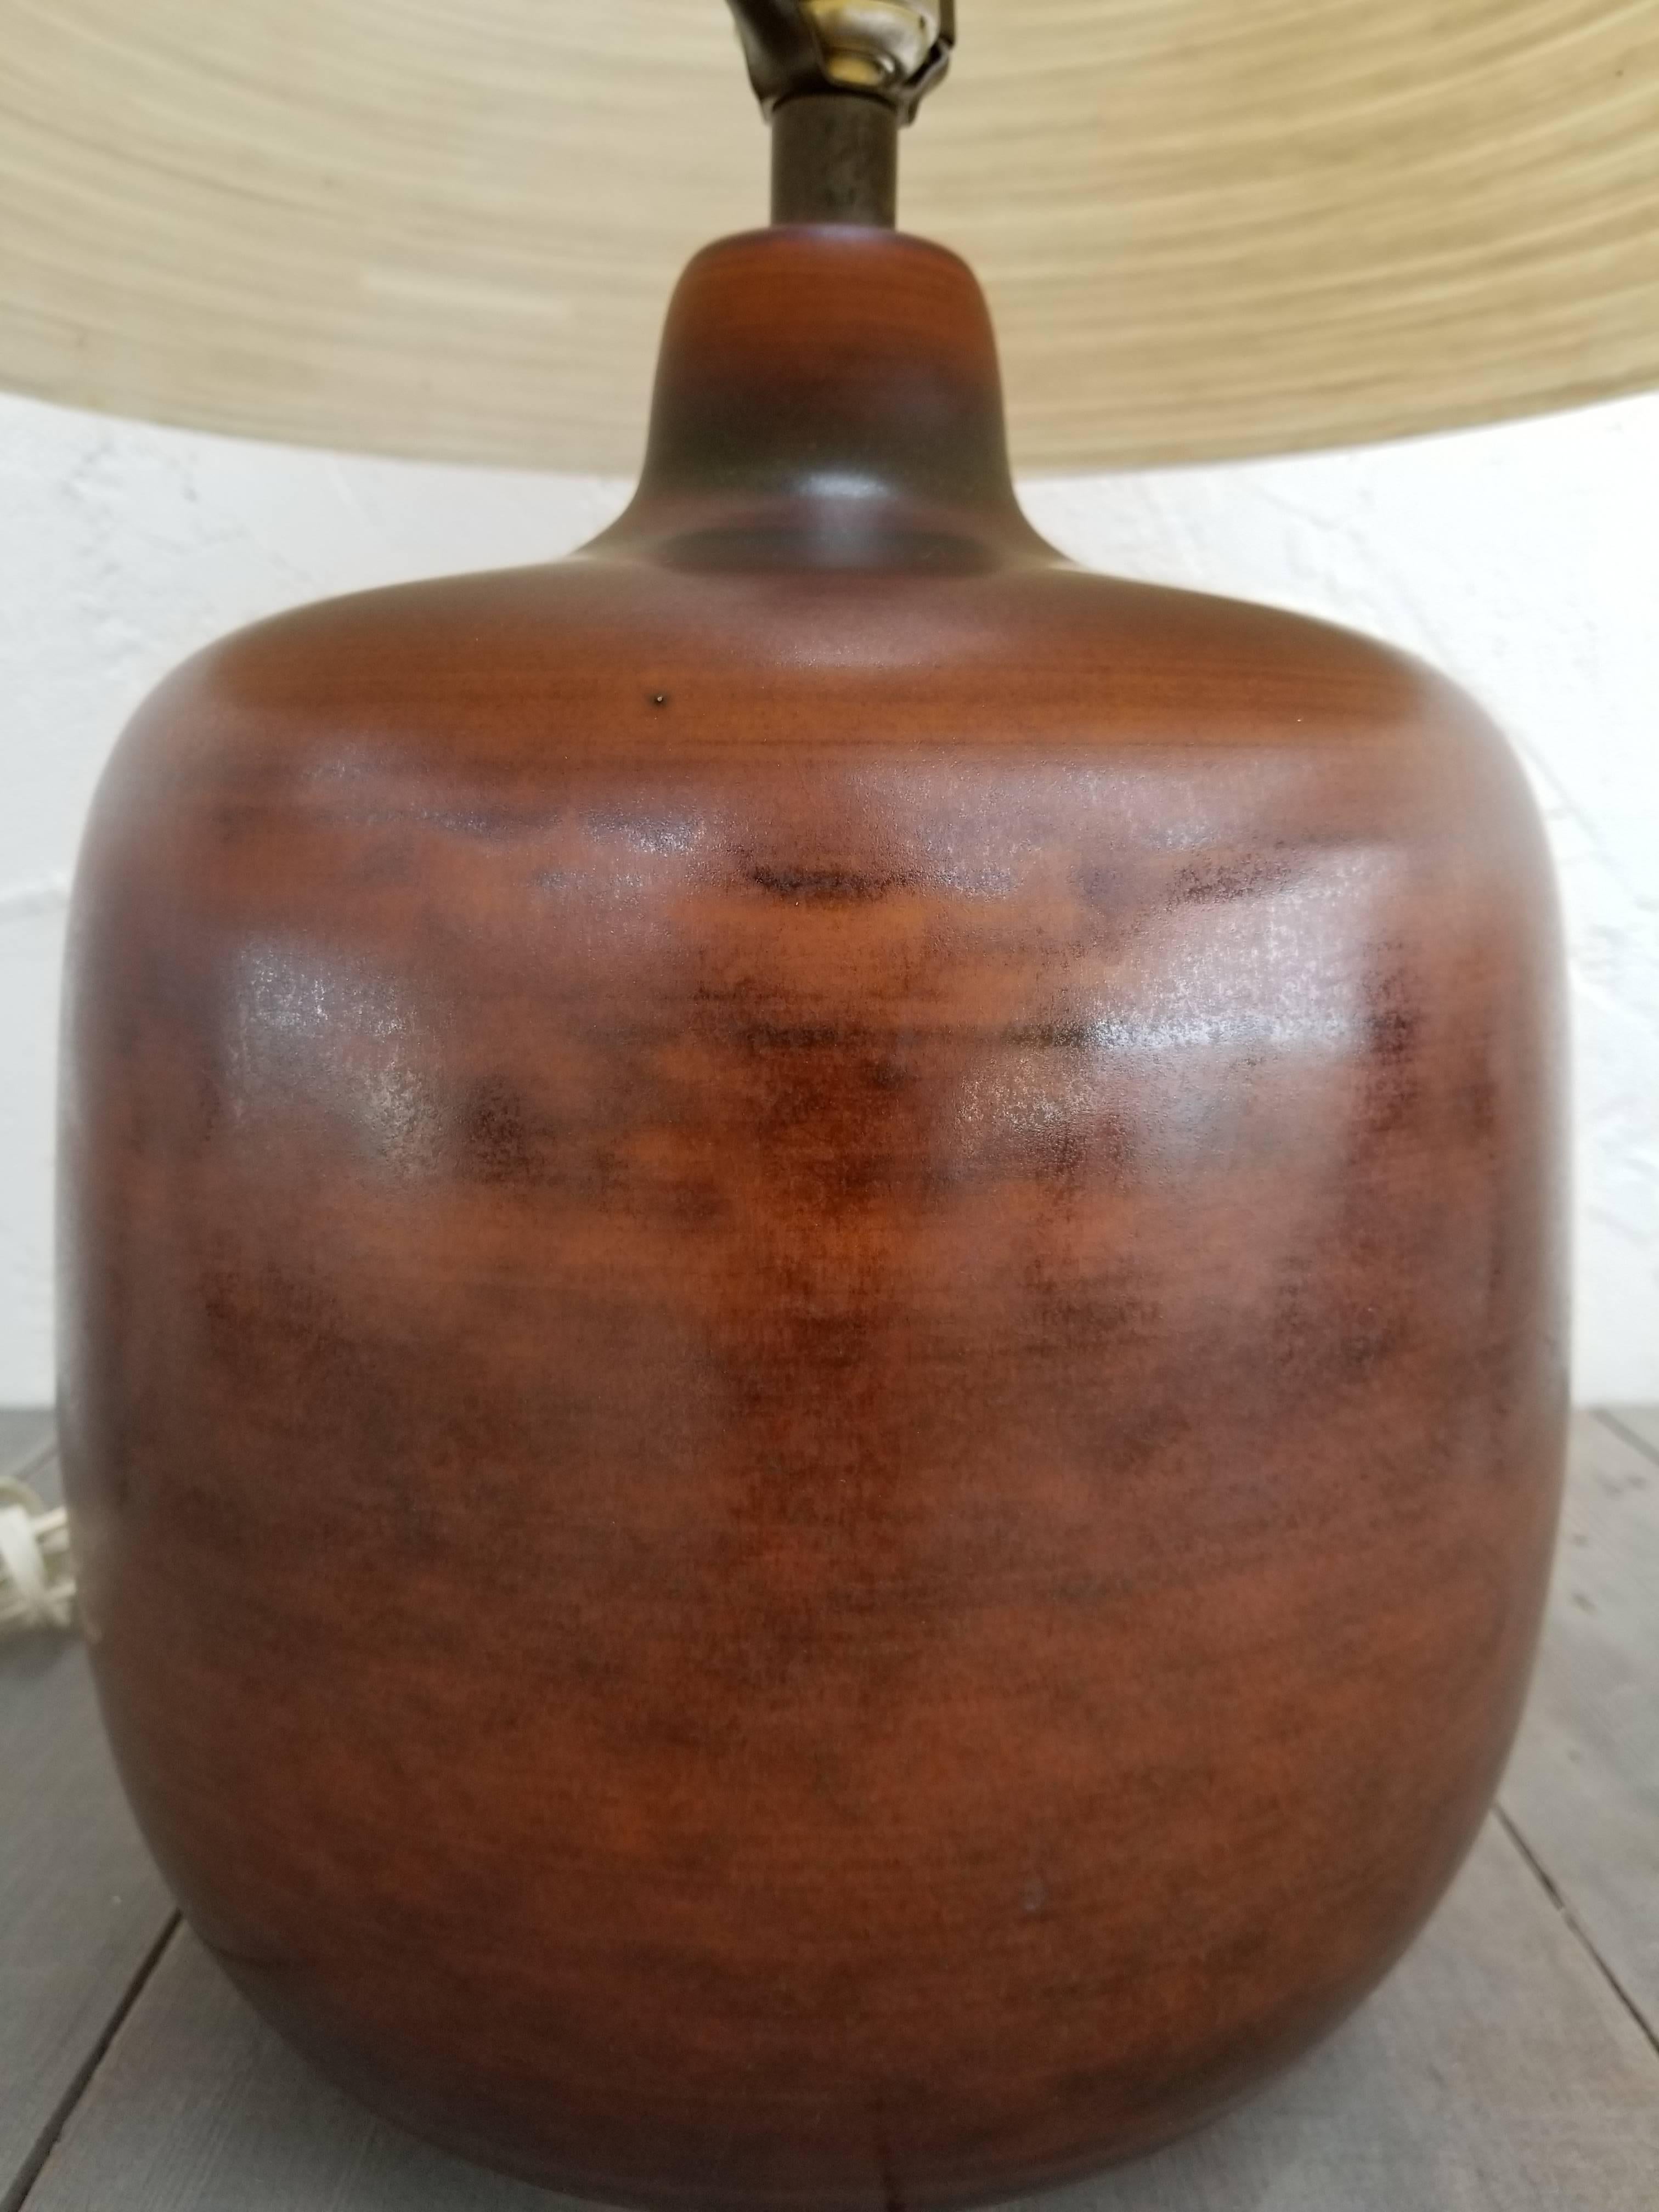 Beautiful, vintage Bostlund stoneware vase with a glowing, copper-like glaze and finish. Original shade of jute and fiberglass creates a soft glow. Very organic, very nice! Lotte and Gunnar Bostlund were Danish trained and created their lighting in